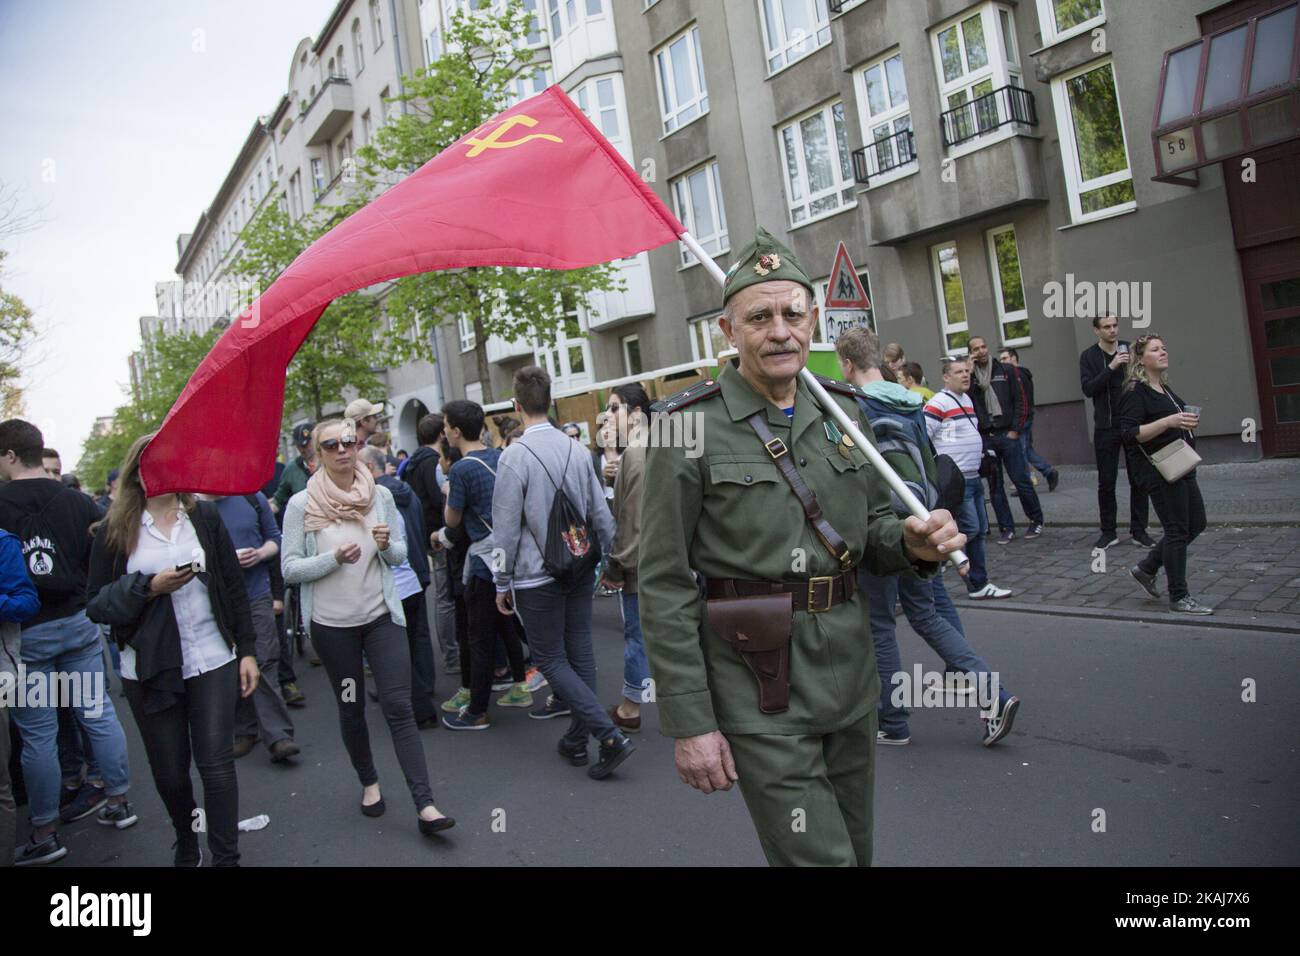 Naydencho from Bulgaria walks wearing a soldier uniform and carrying a flag of the Soviet Union during the annual MyFest in the Kreuzberg district on May 1, 2016 in Berlin, Germany. May Day, or International Workers' Day, was established as a public holiday in Germany in 1933. Since 1987 May Day has also become known in Berlin for violent clashes between police and mostly left-wing demonstrators.  Stock Photo